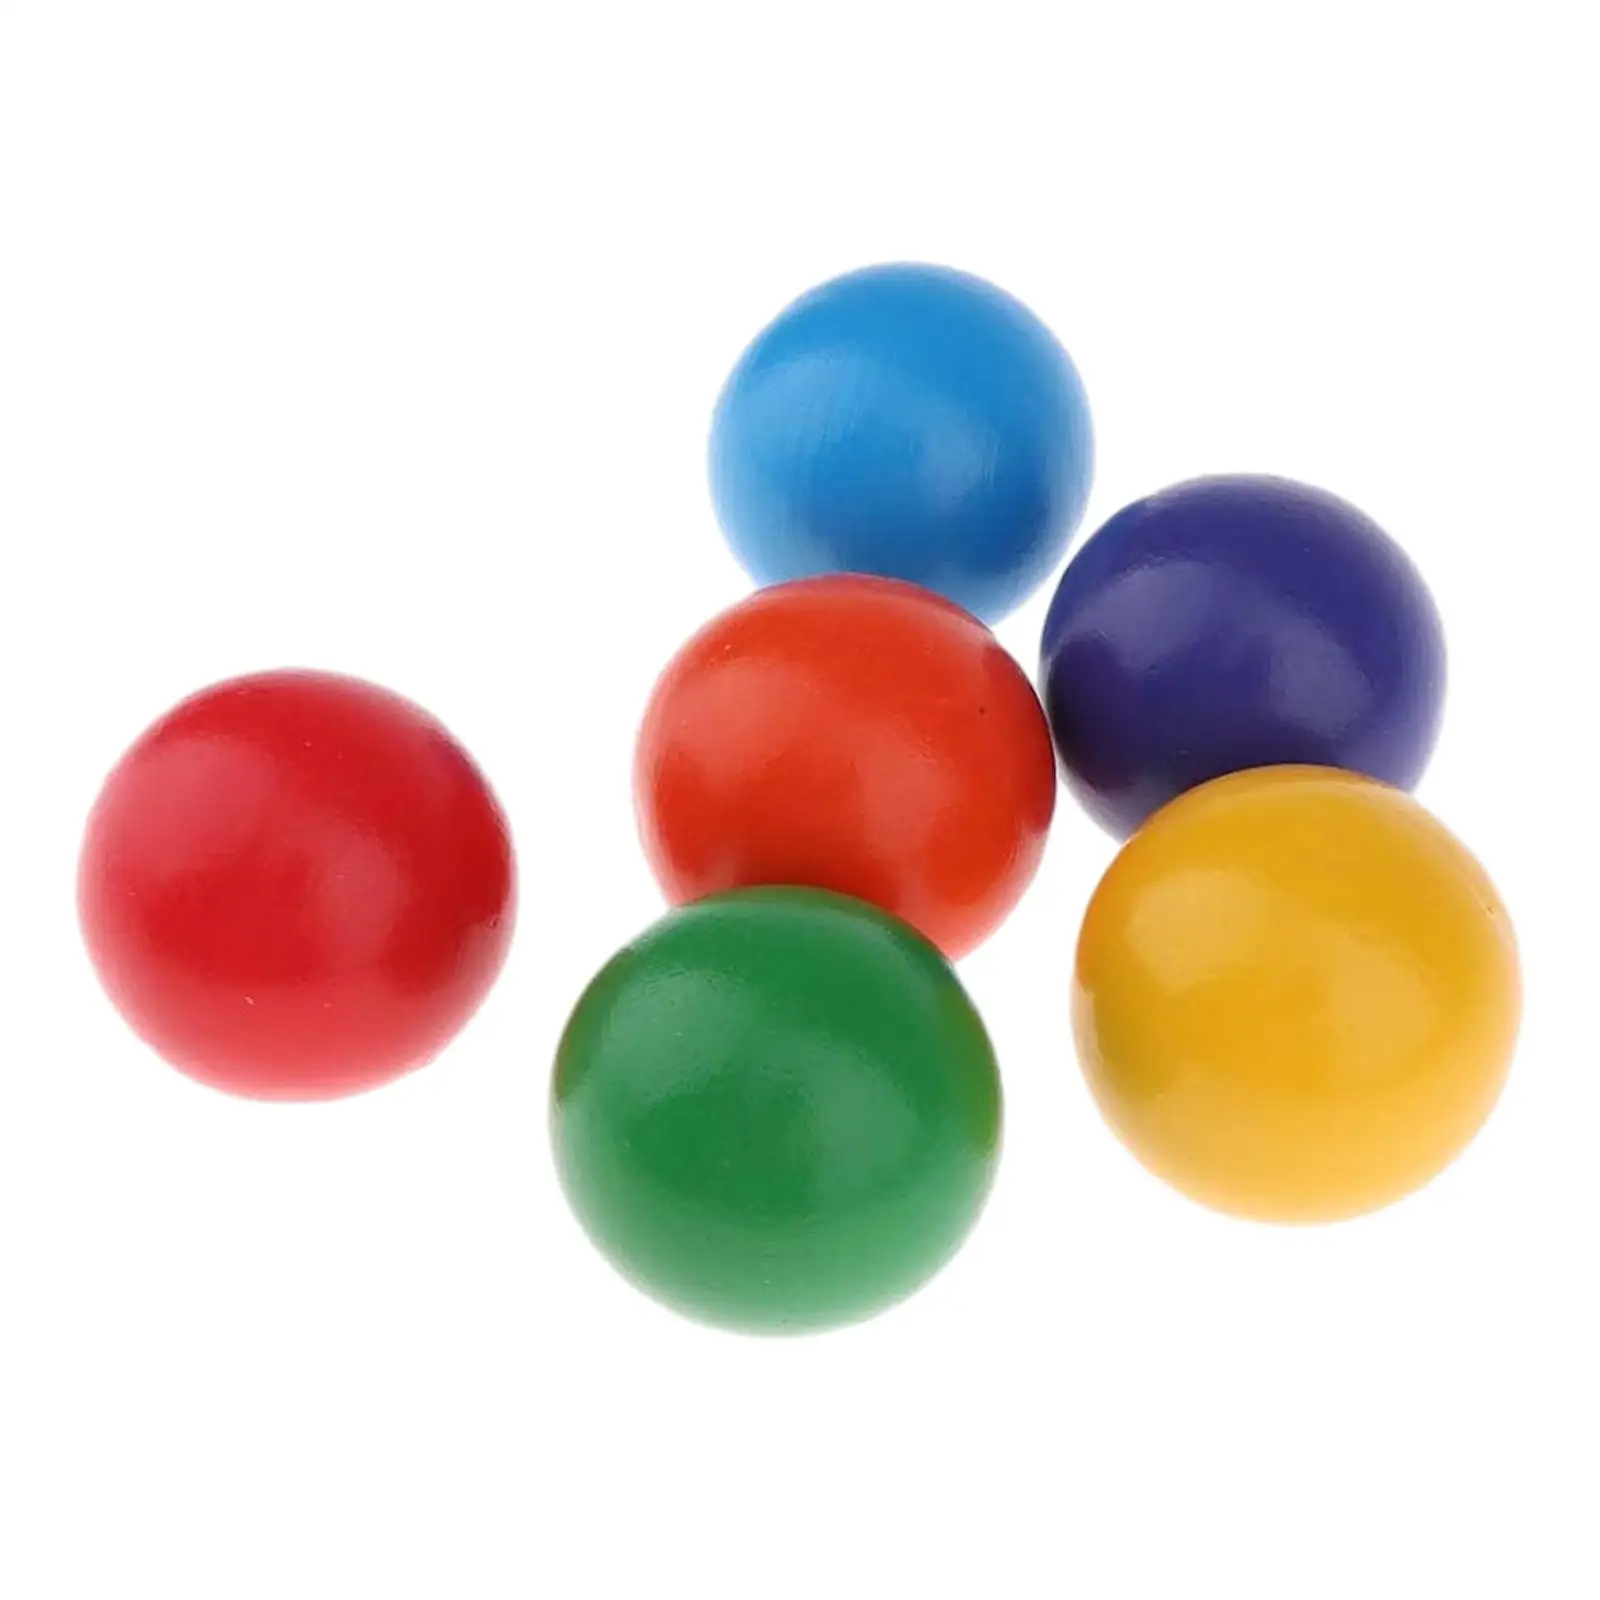 6 Pieces Montessori Wooden Balls 1.77`` Gifts Inspire Curiosity Color Sorting Toys for Kids Boys Age 3 4 5 6 Girls Children